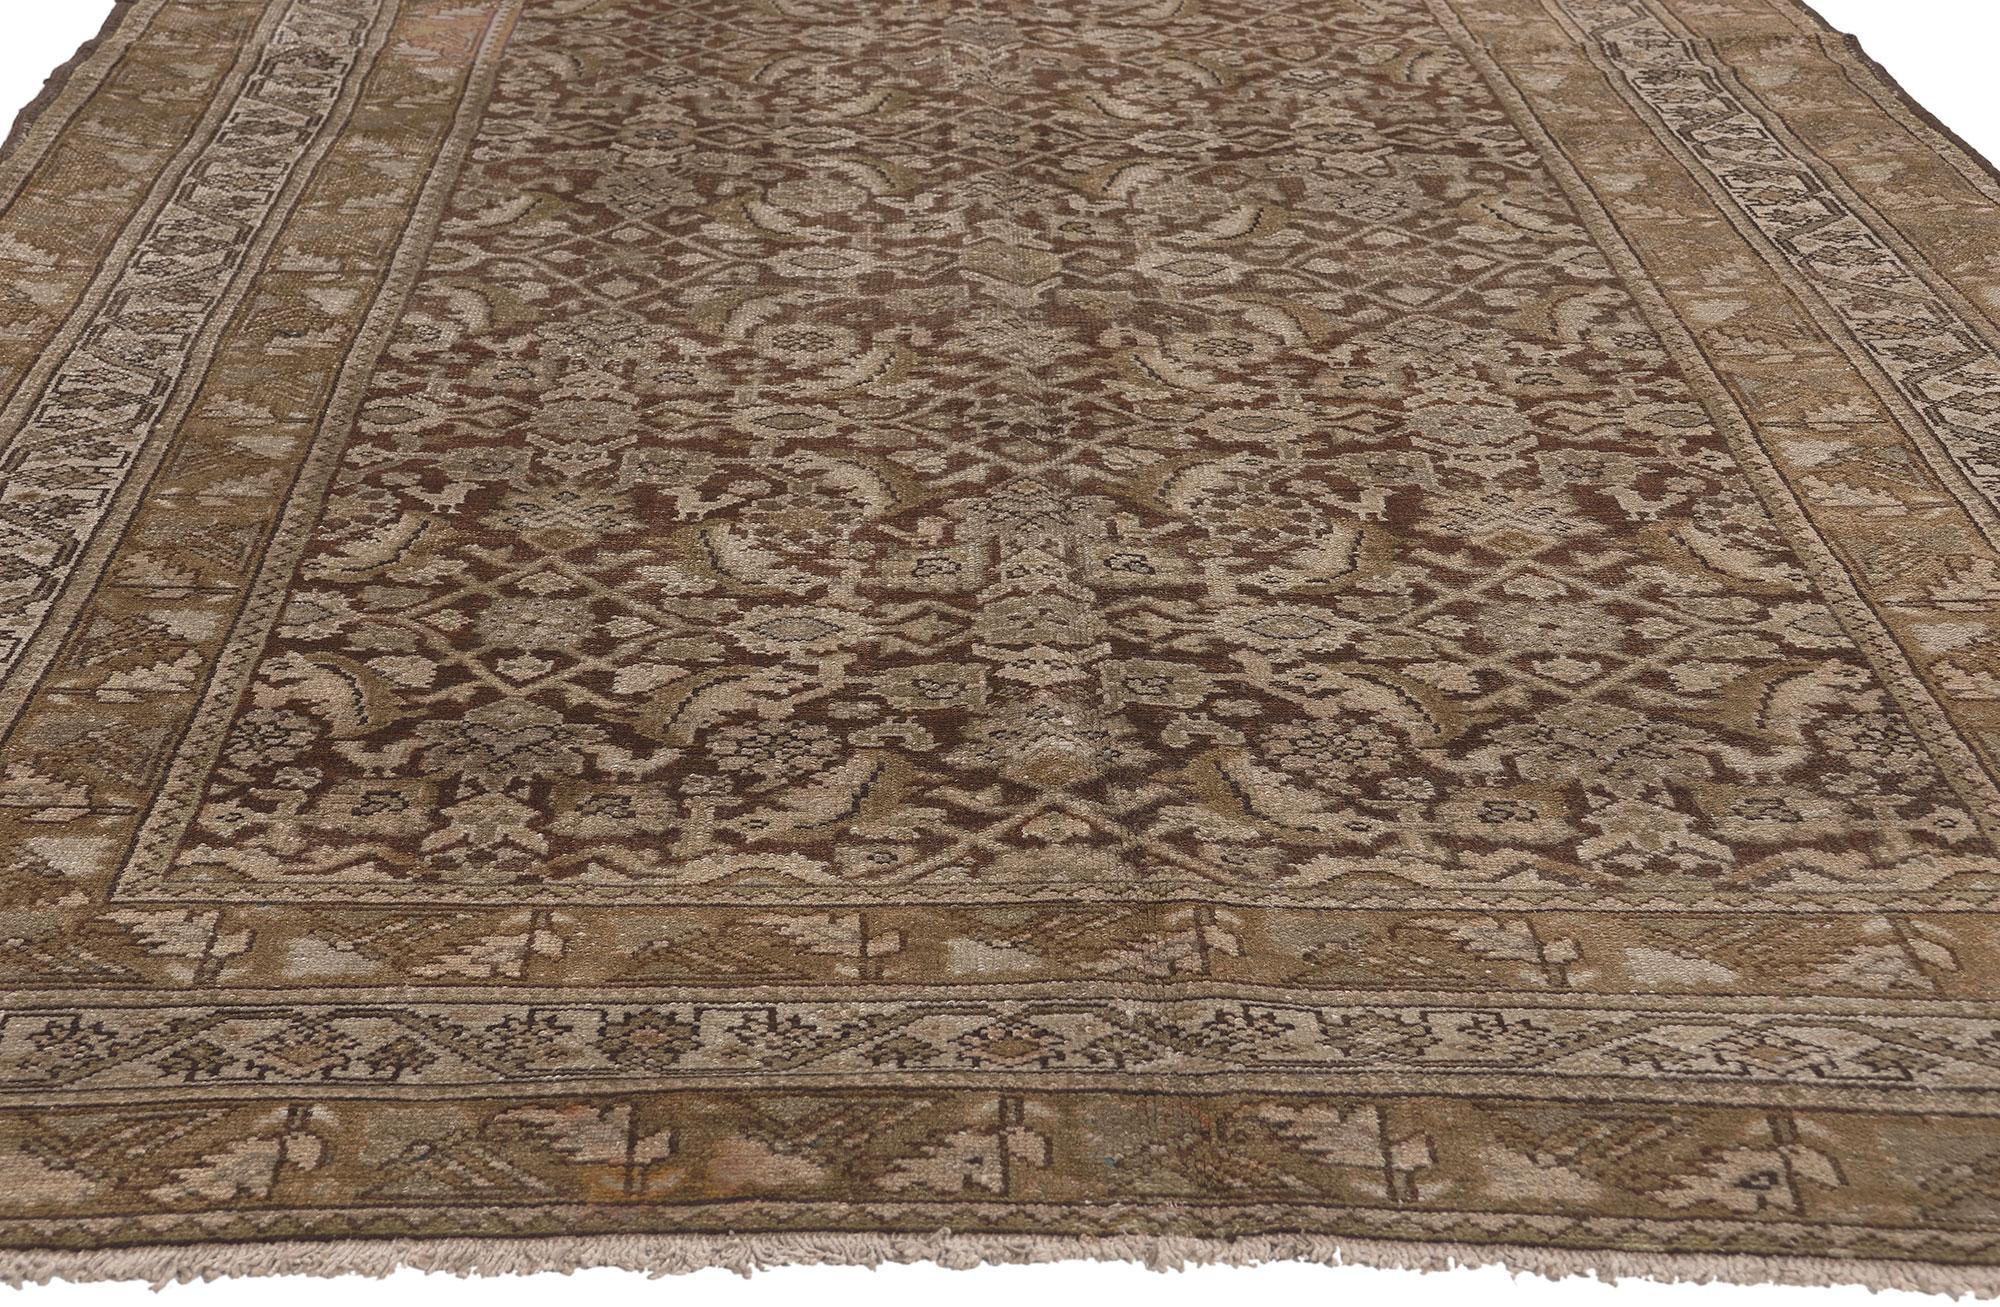 Antique Persian Malayer Rug, Rich and Neutral Meets Warm and Cozy In Good Condition For Sale In Dallas, TX